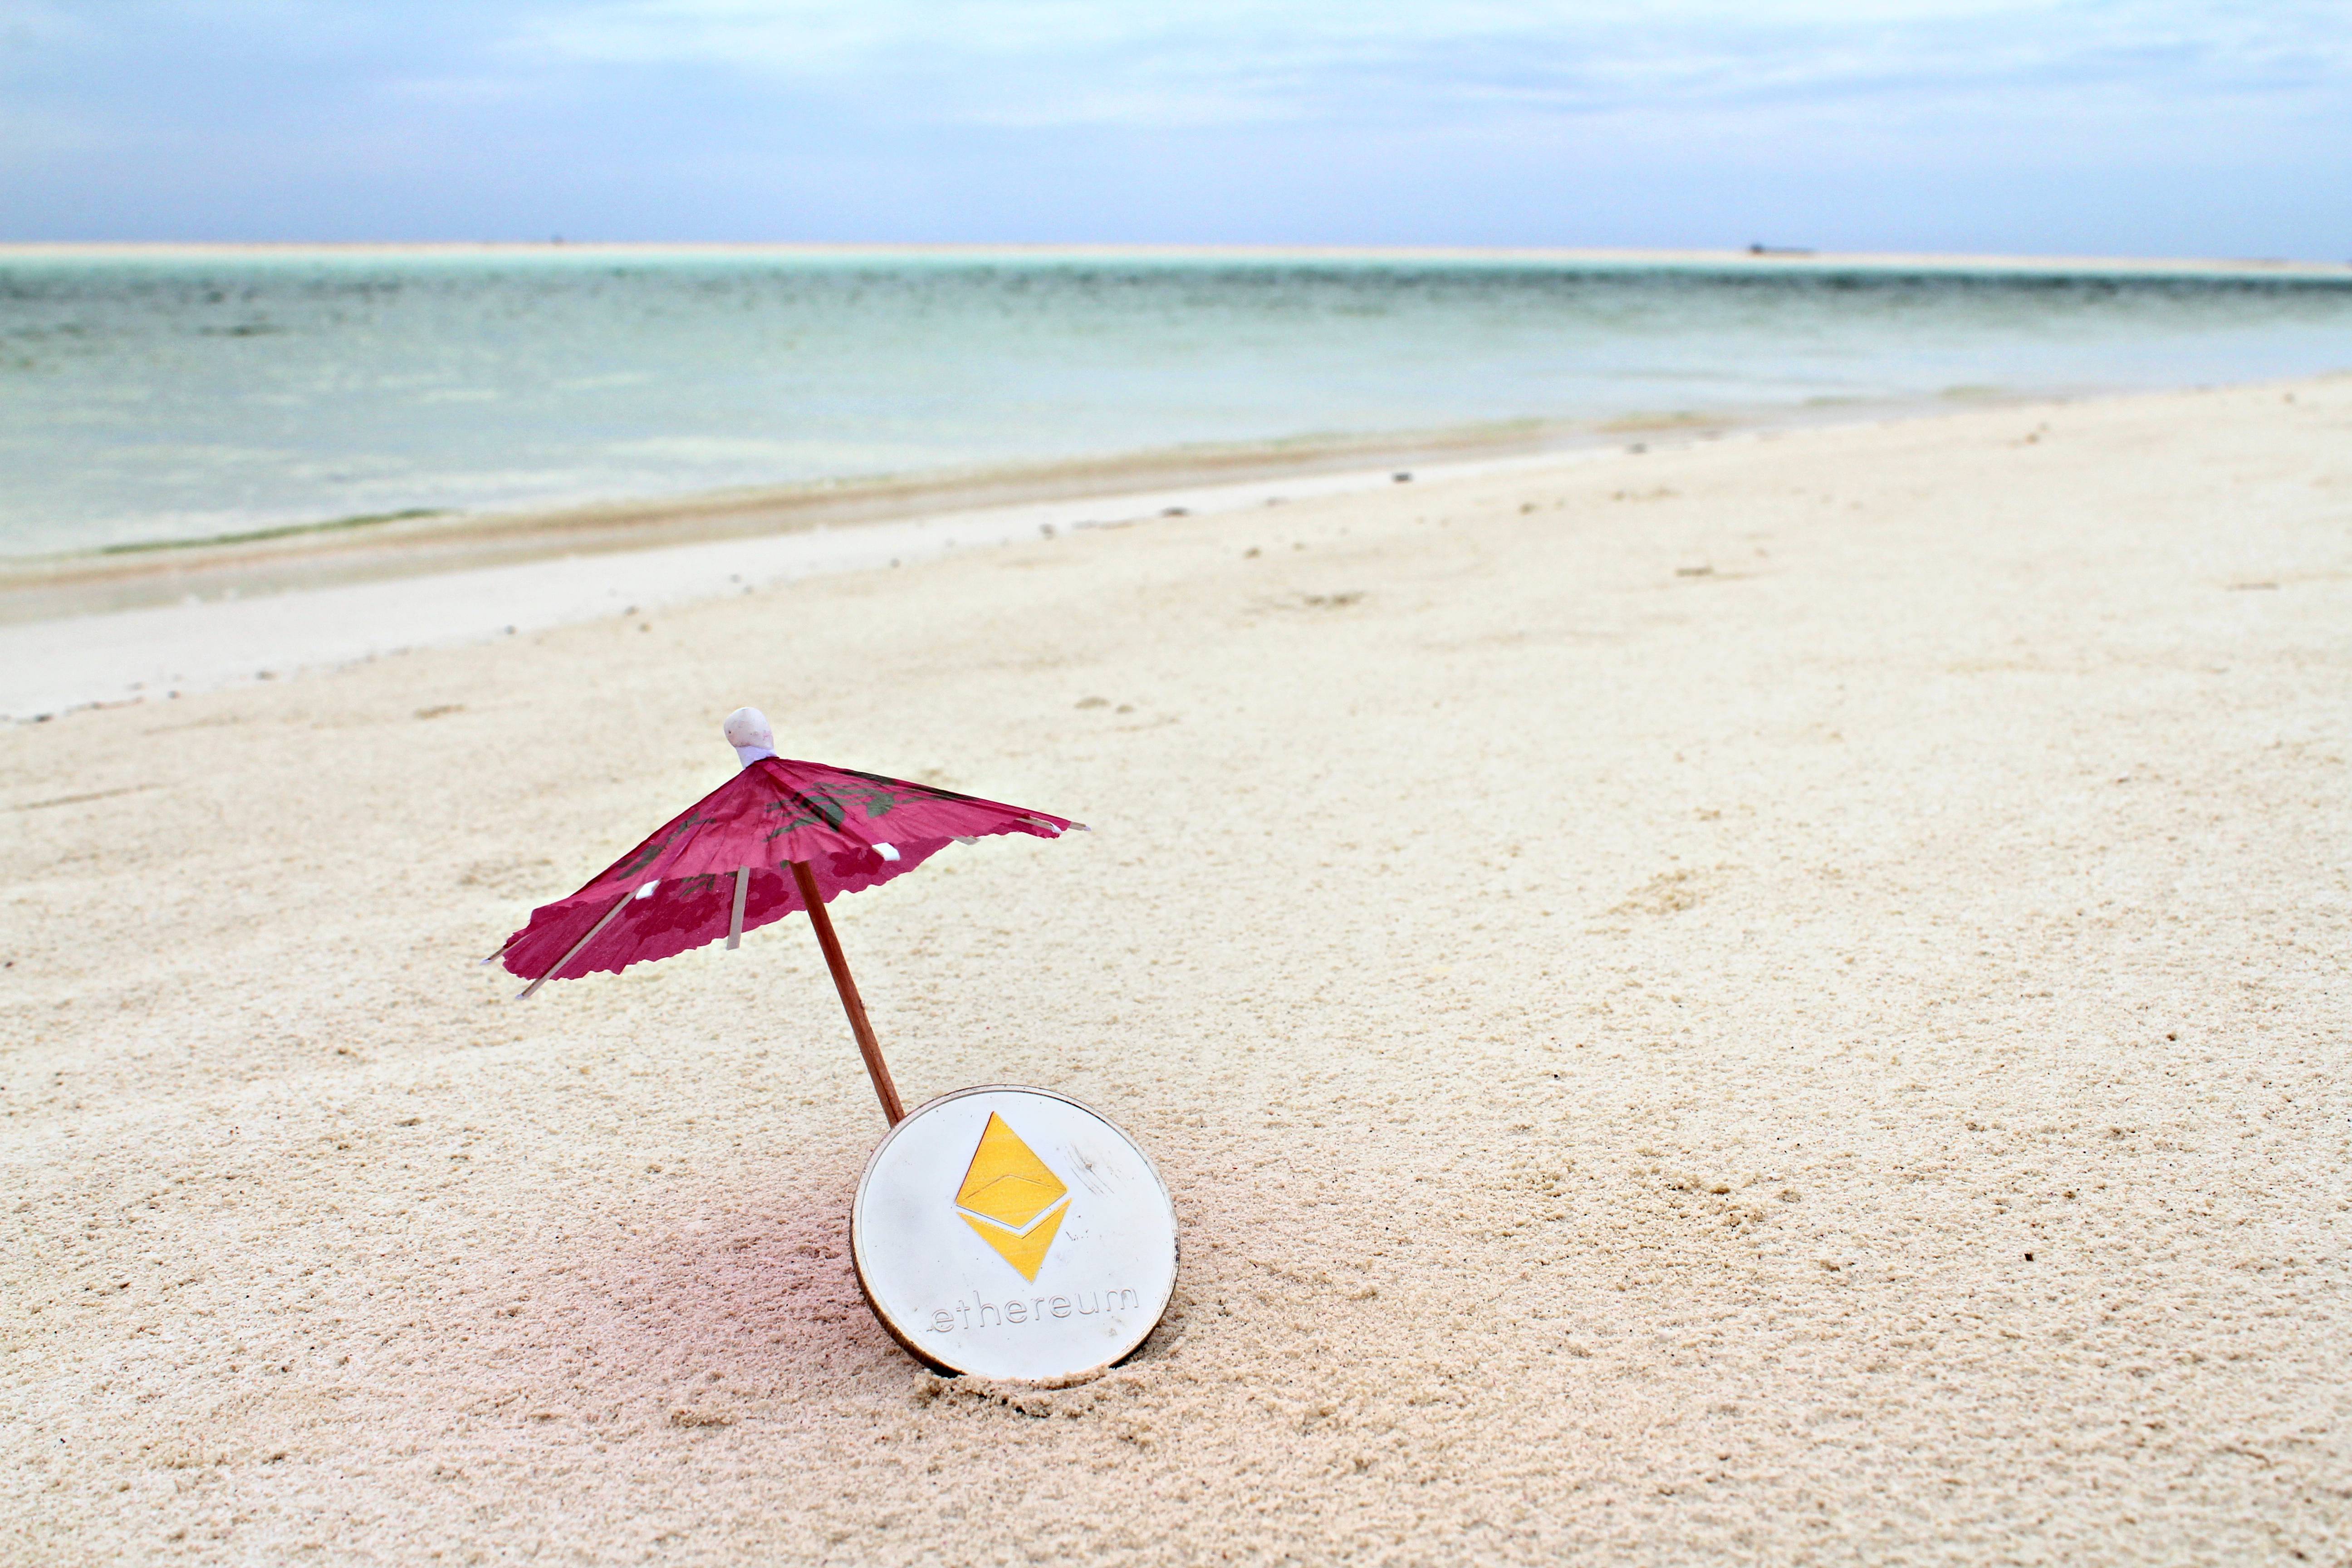 Silver Ethereum coin under the paper umbrella on the beach, shal